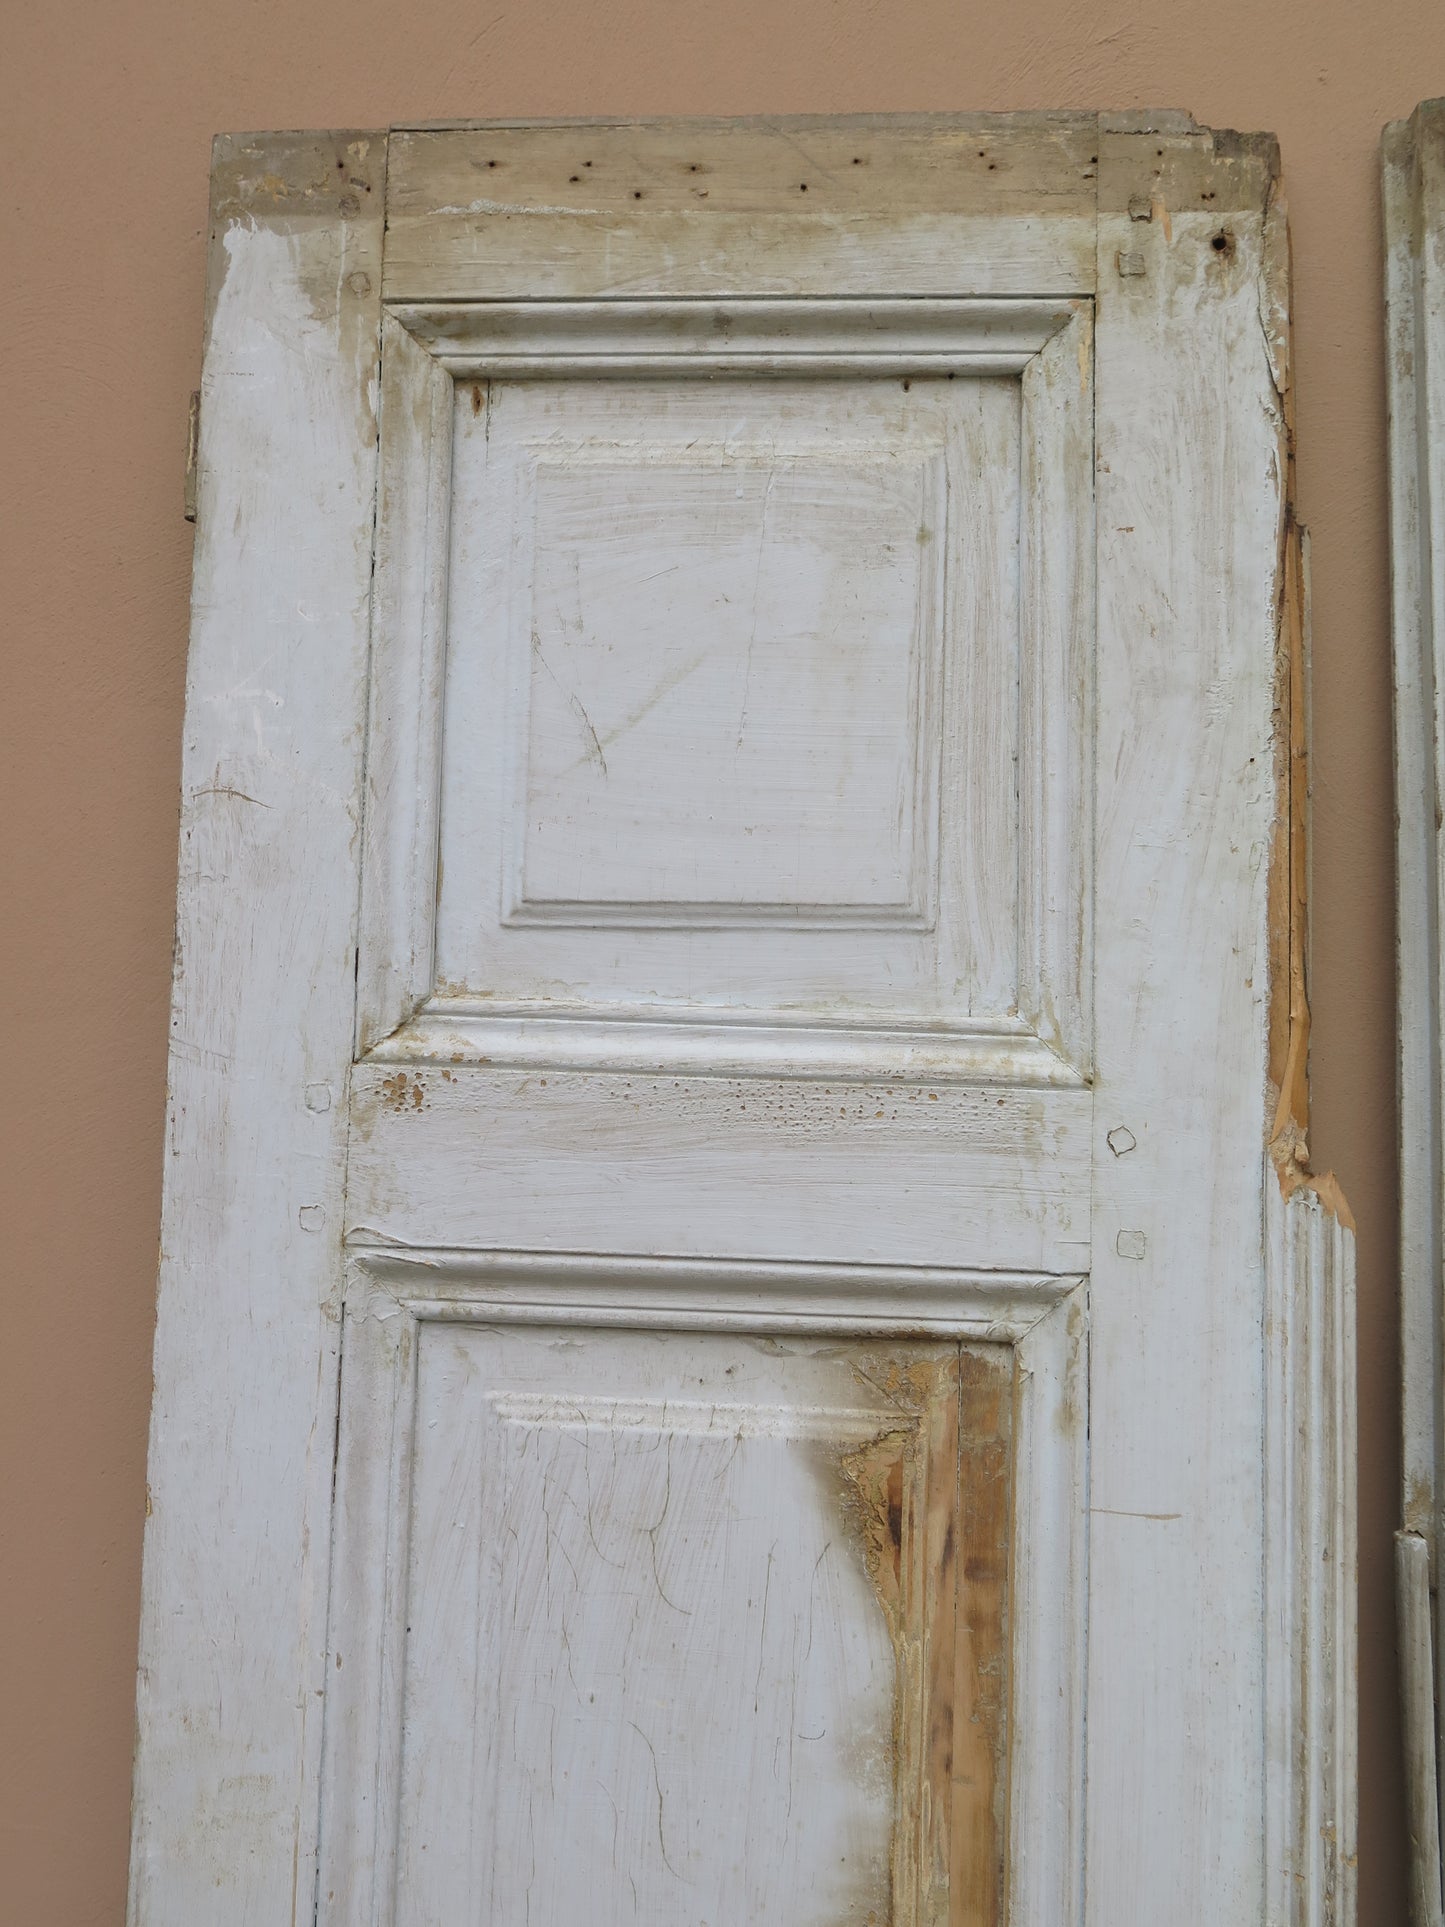 TWO ANCIENT WOODEN DOORS TO BE RESTORED 222x53 cm